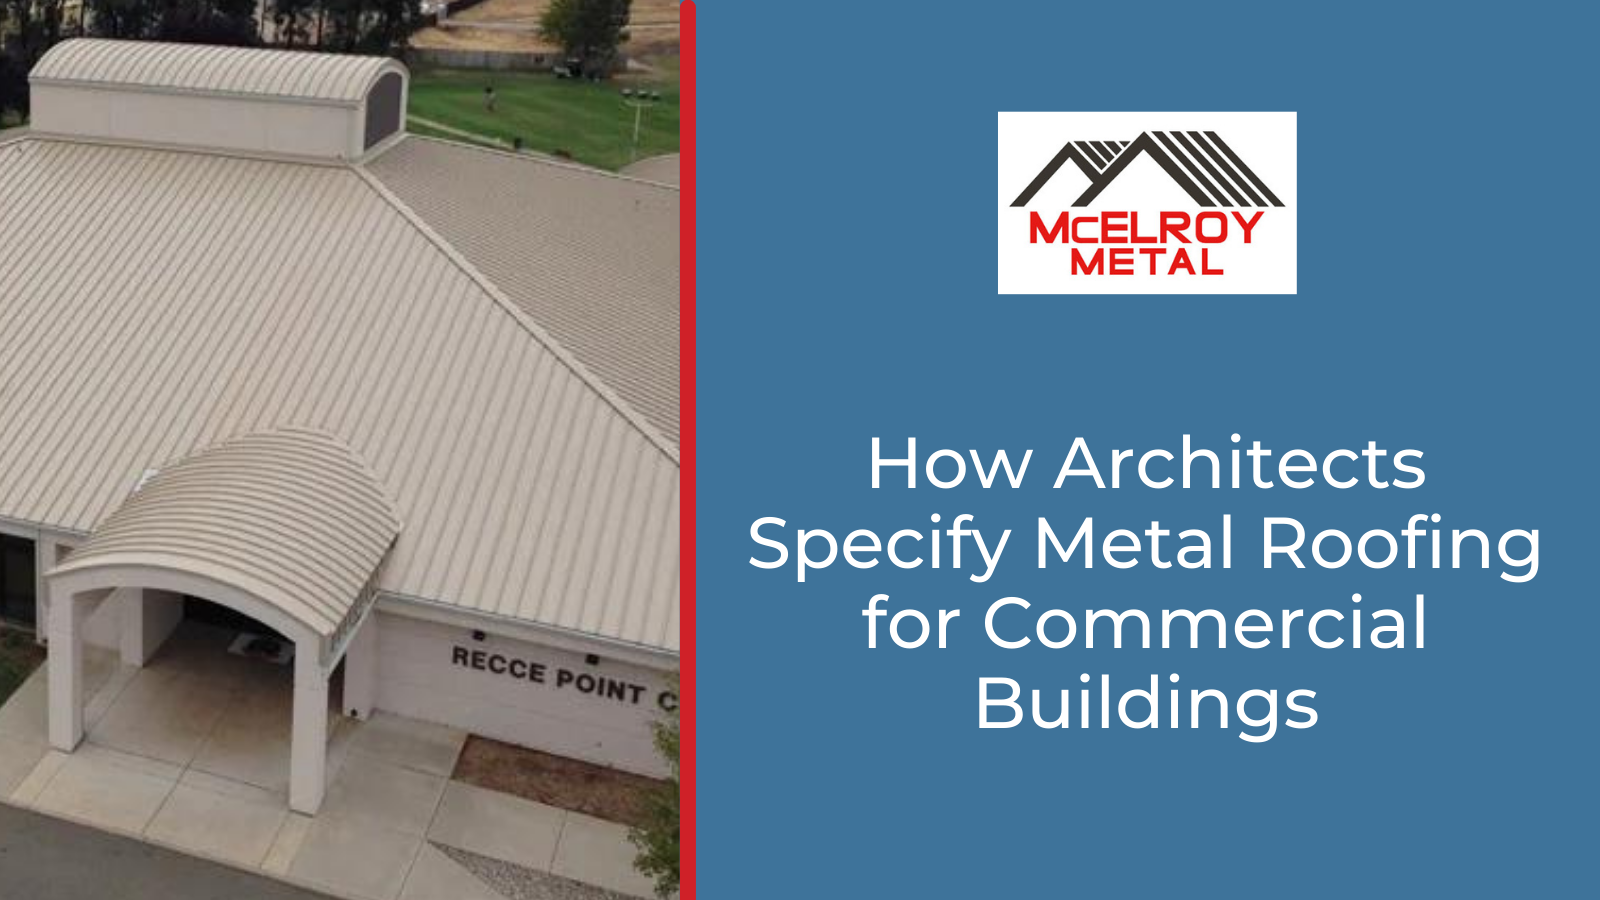 How Architects Specify Metal Roofing for Commercial Buildings